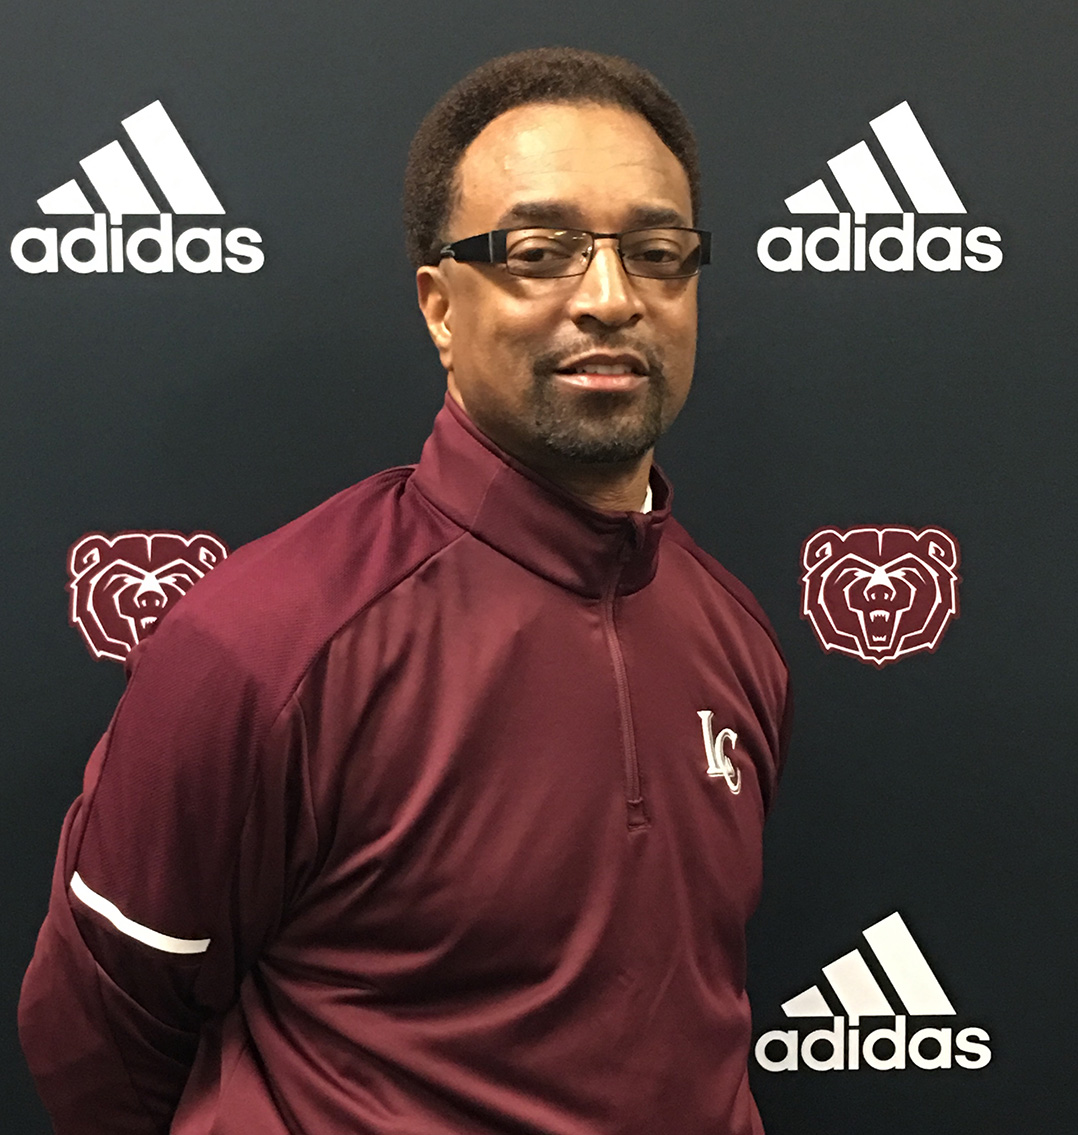 CIG COM 0417 lawrence central new bball coach